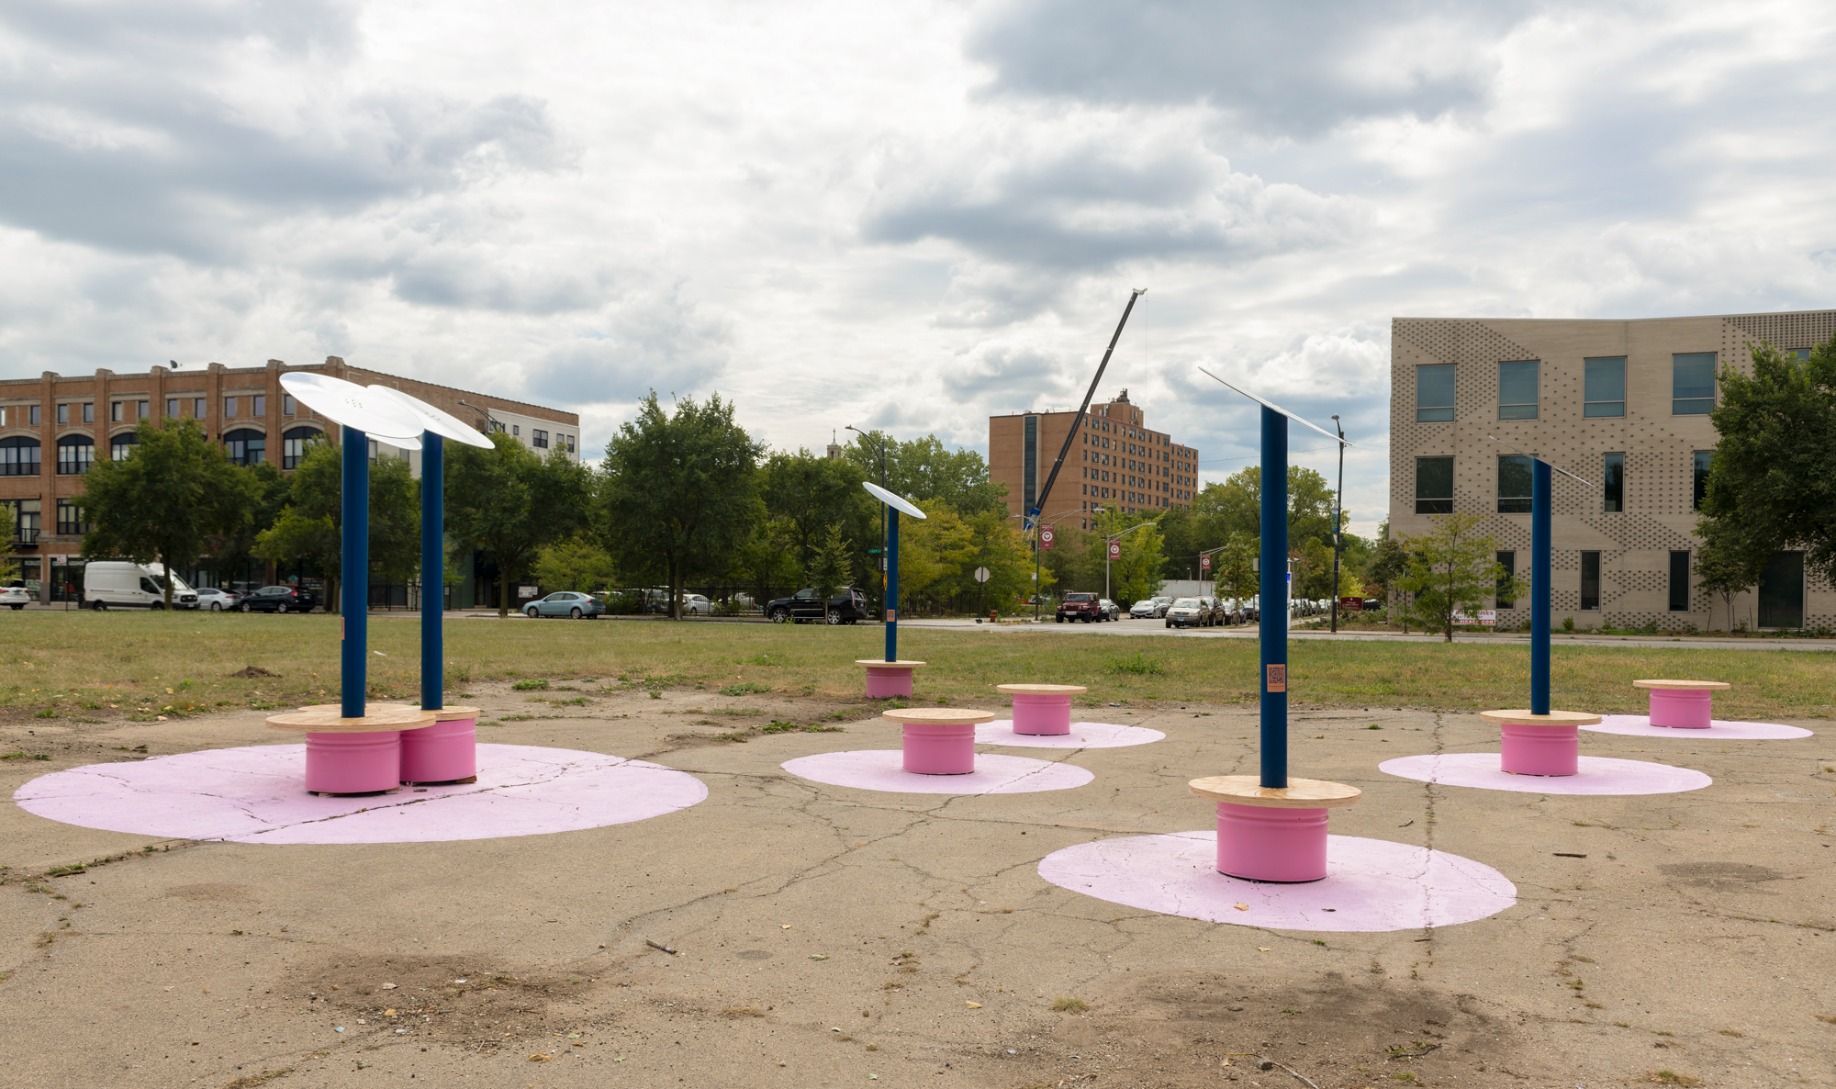 Photo showing pavilion from afar. Reflective disks are held on top of blue poles which are fixed into pink benches with timber tops. The full lawn is visible and neighbouring buildings. The ground is concrete with pink circles painted onto it where a bench appears.